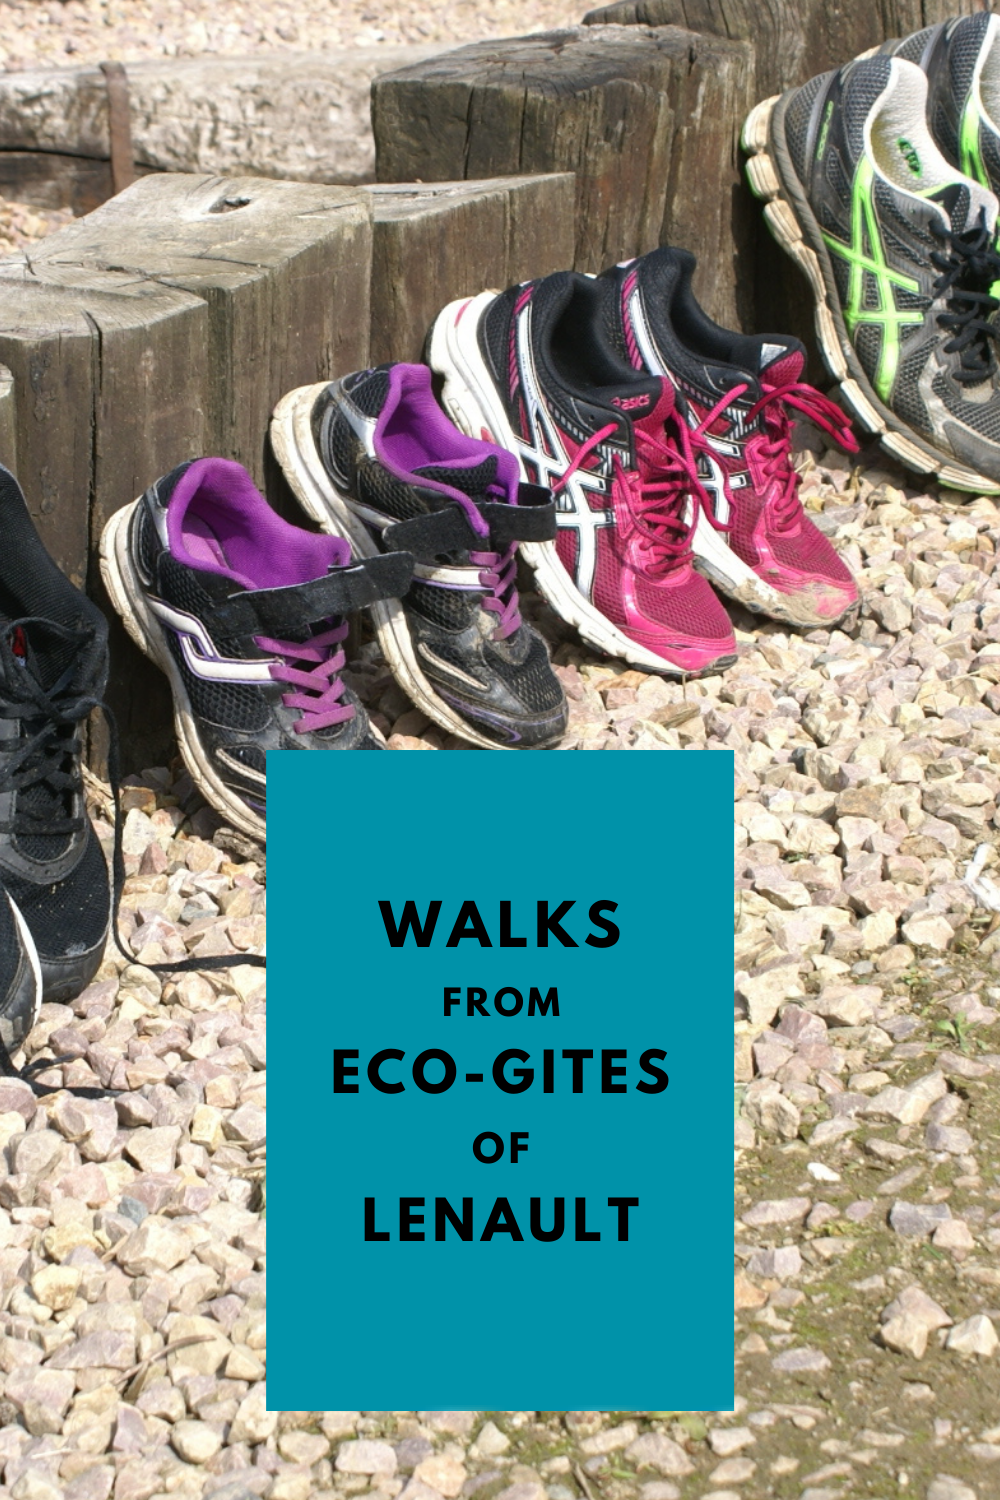 Details of walks from Eco-Gites of Lenault, a family friendly holiday cottage in Normandy